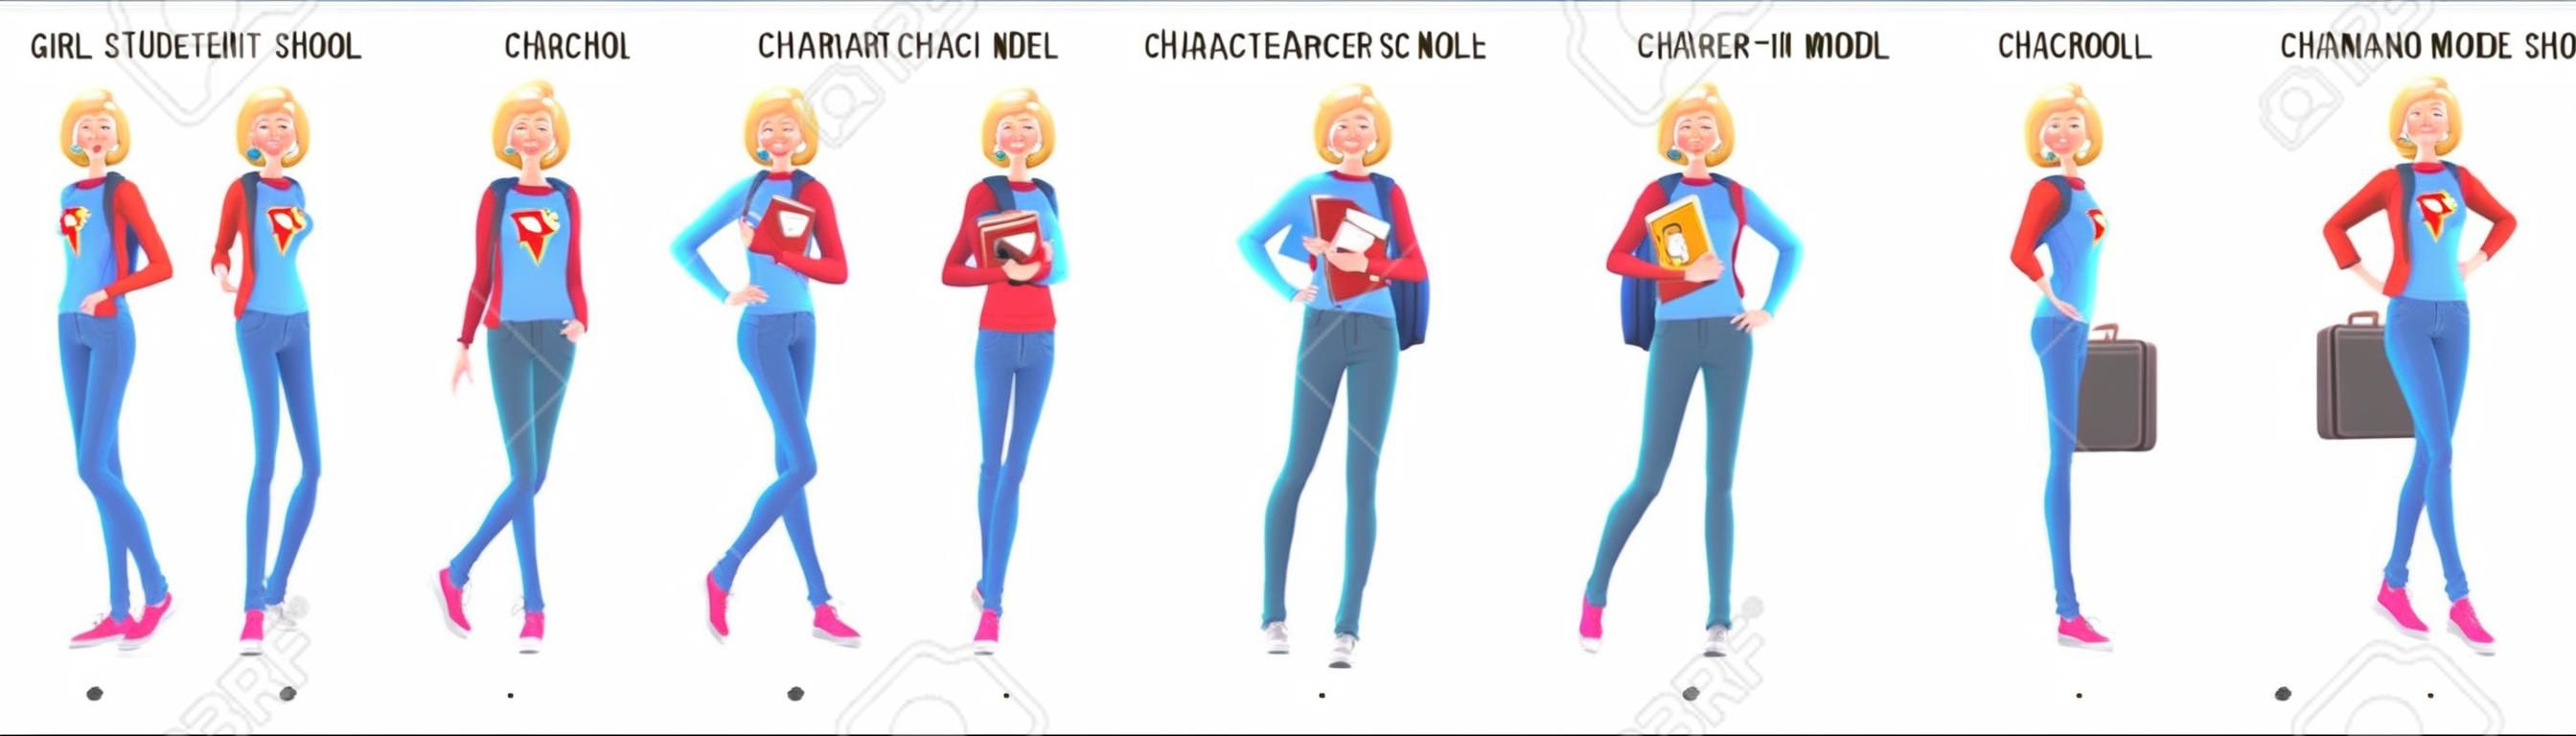 Girl Student Character Design Model Sheet with walk cycle animation.